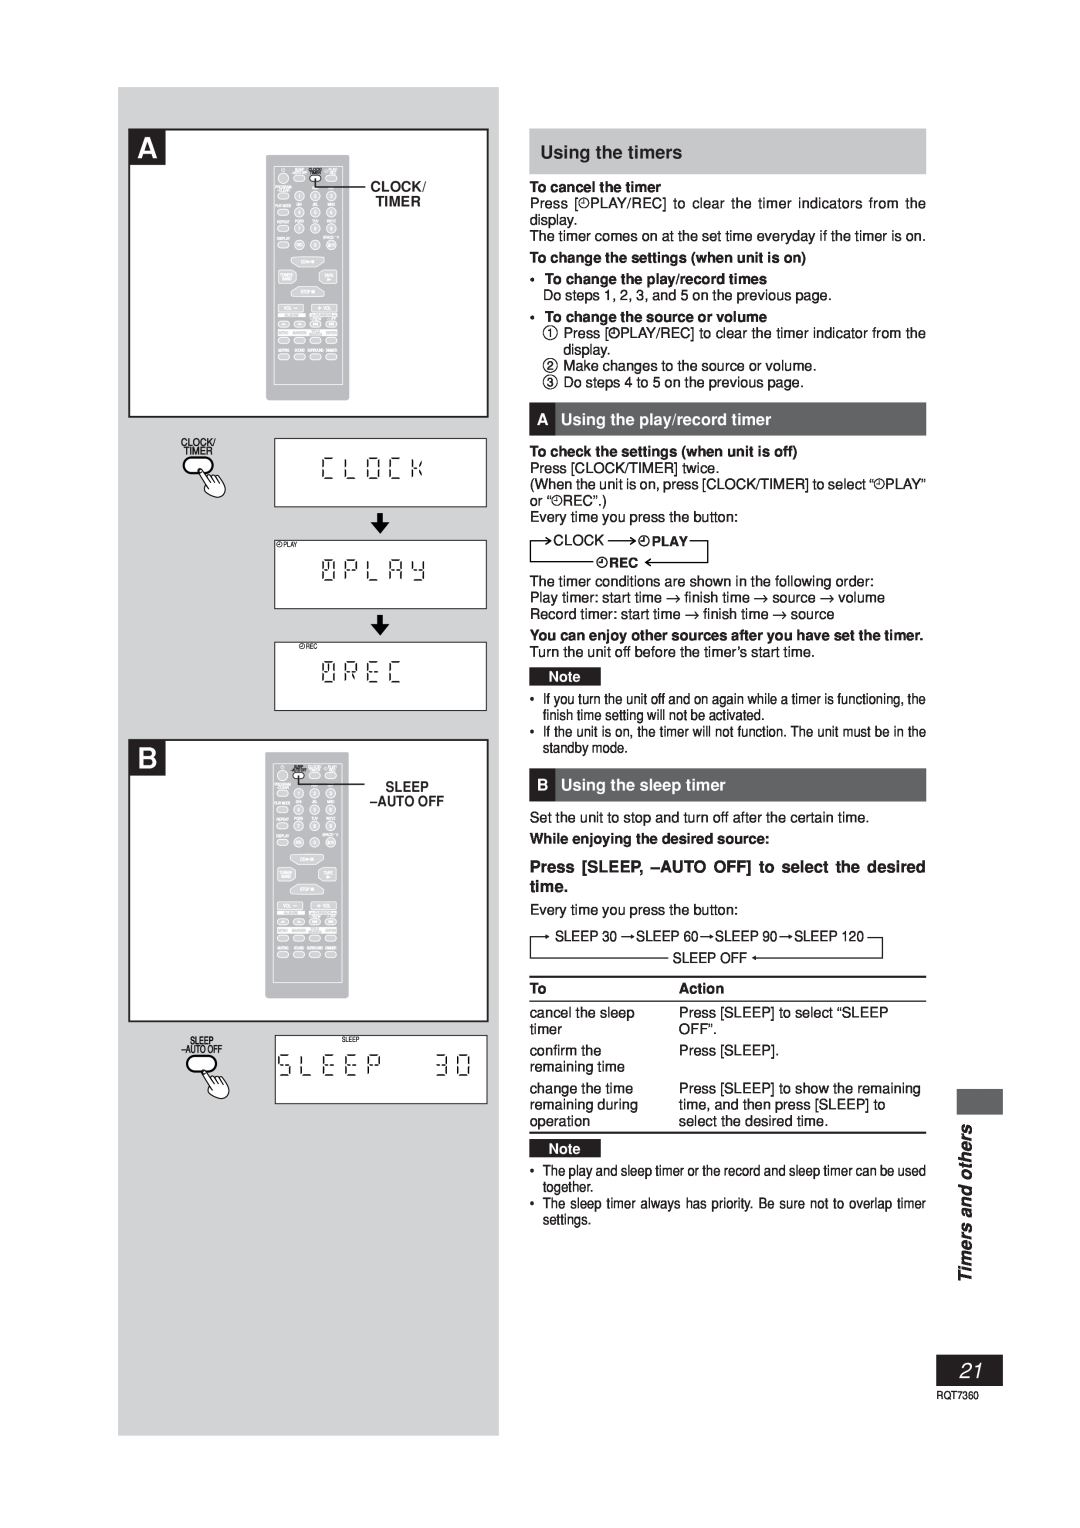 Panasonic SC-PM9 technical specifications Using the timers, Timers, A Using the play/record timer, B Using the sleep timer 